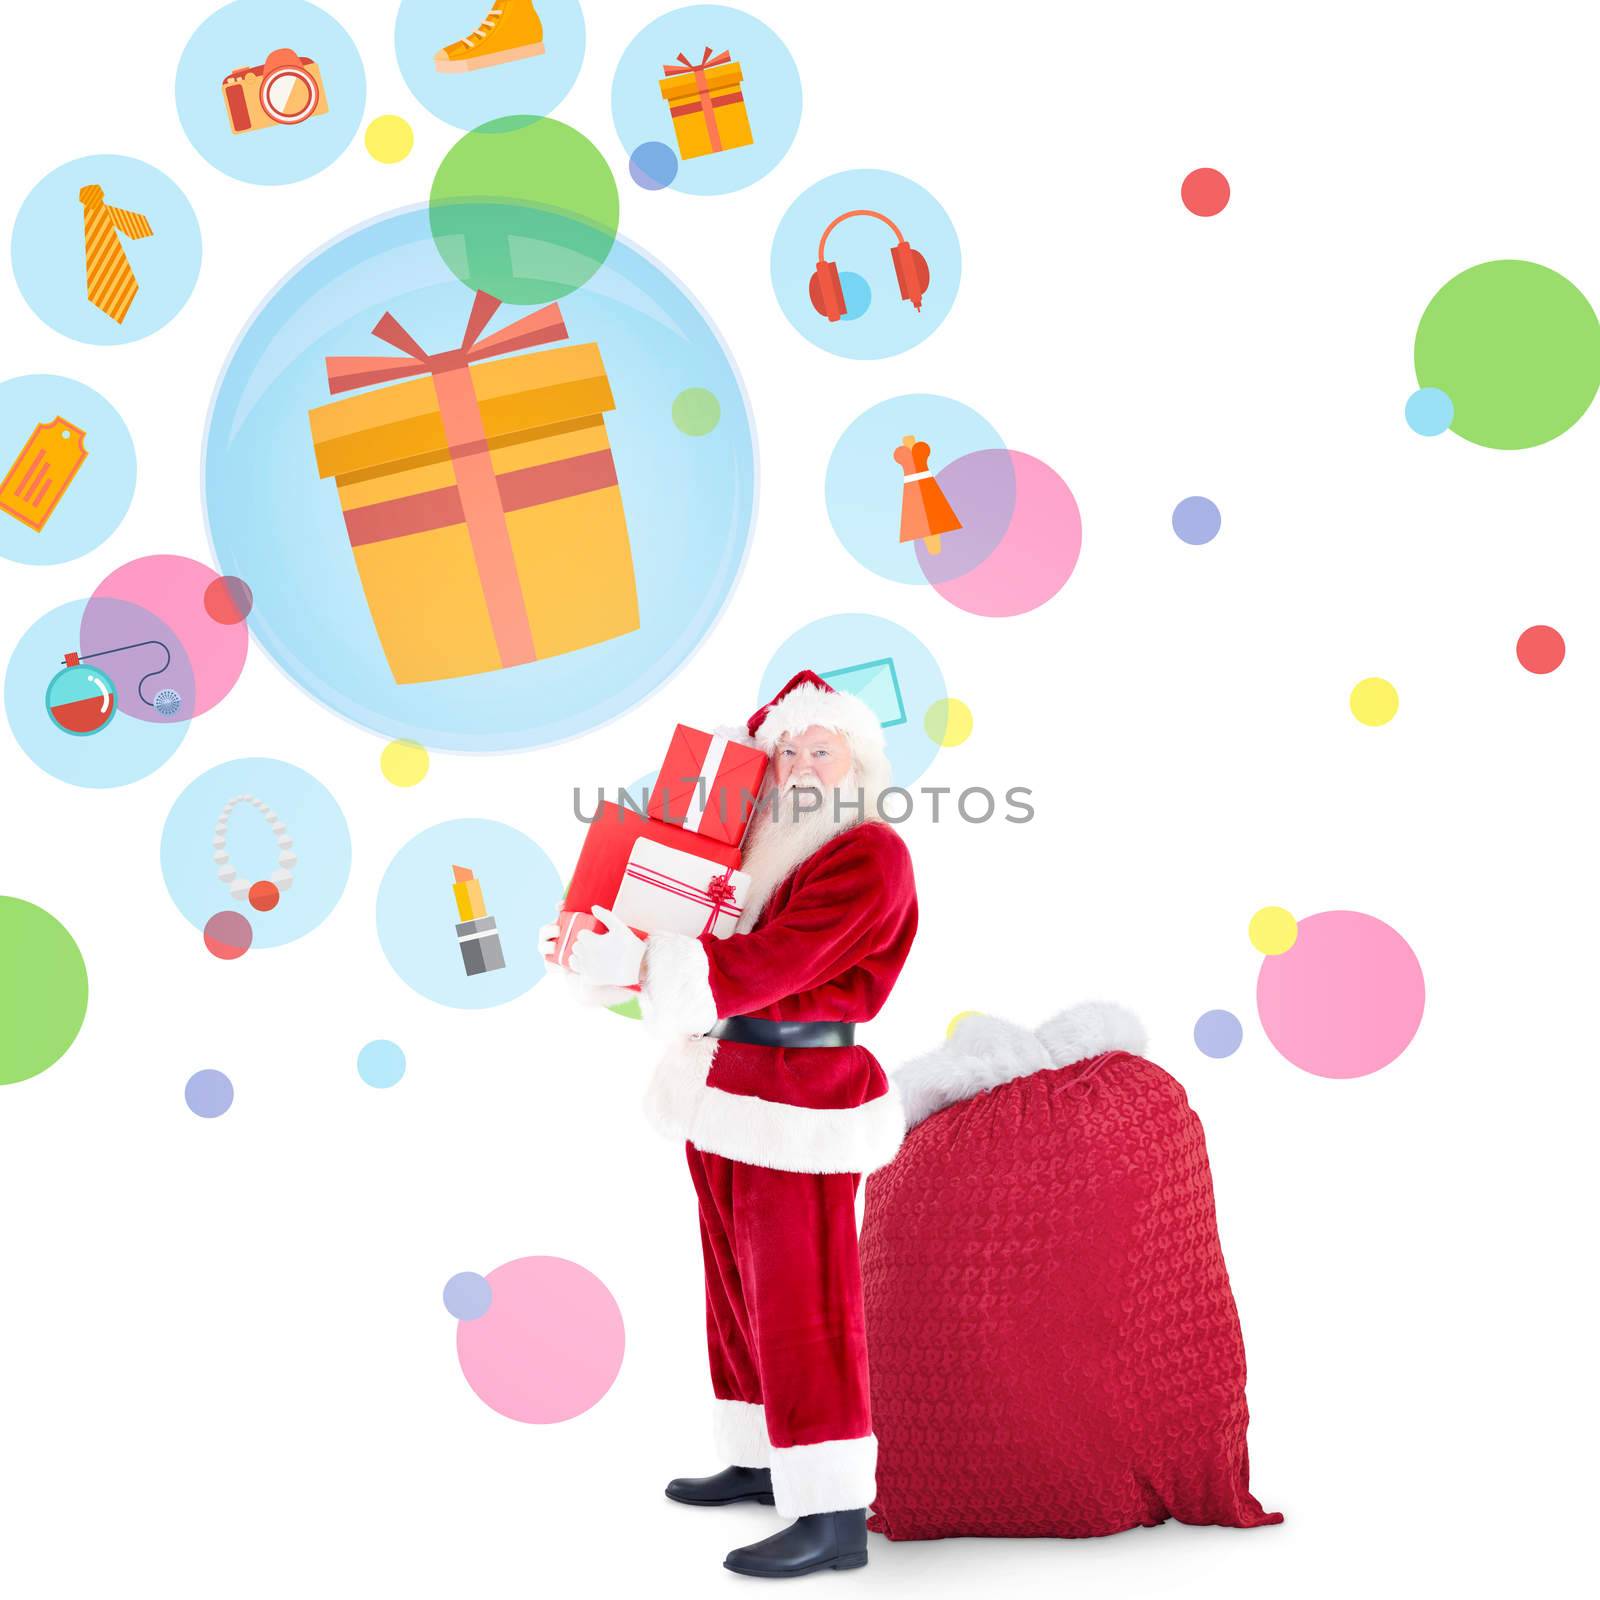 Santa claus carrying pile of gifts against dot pattern